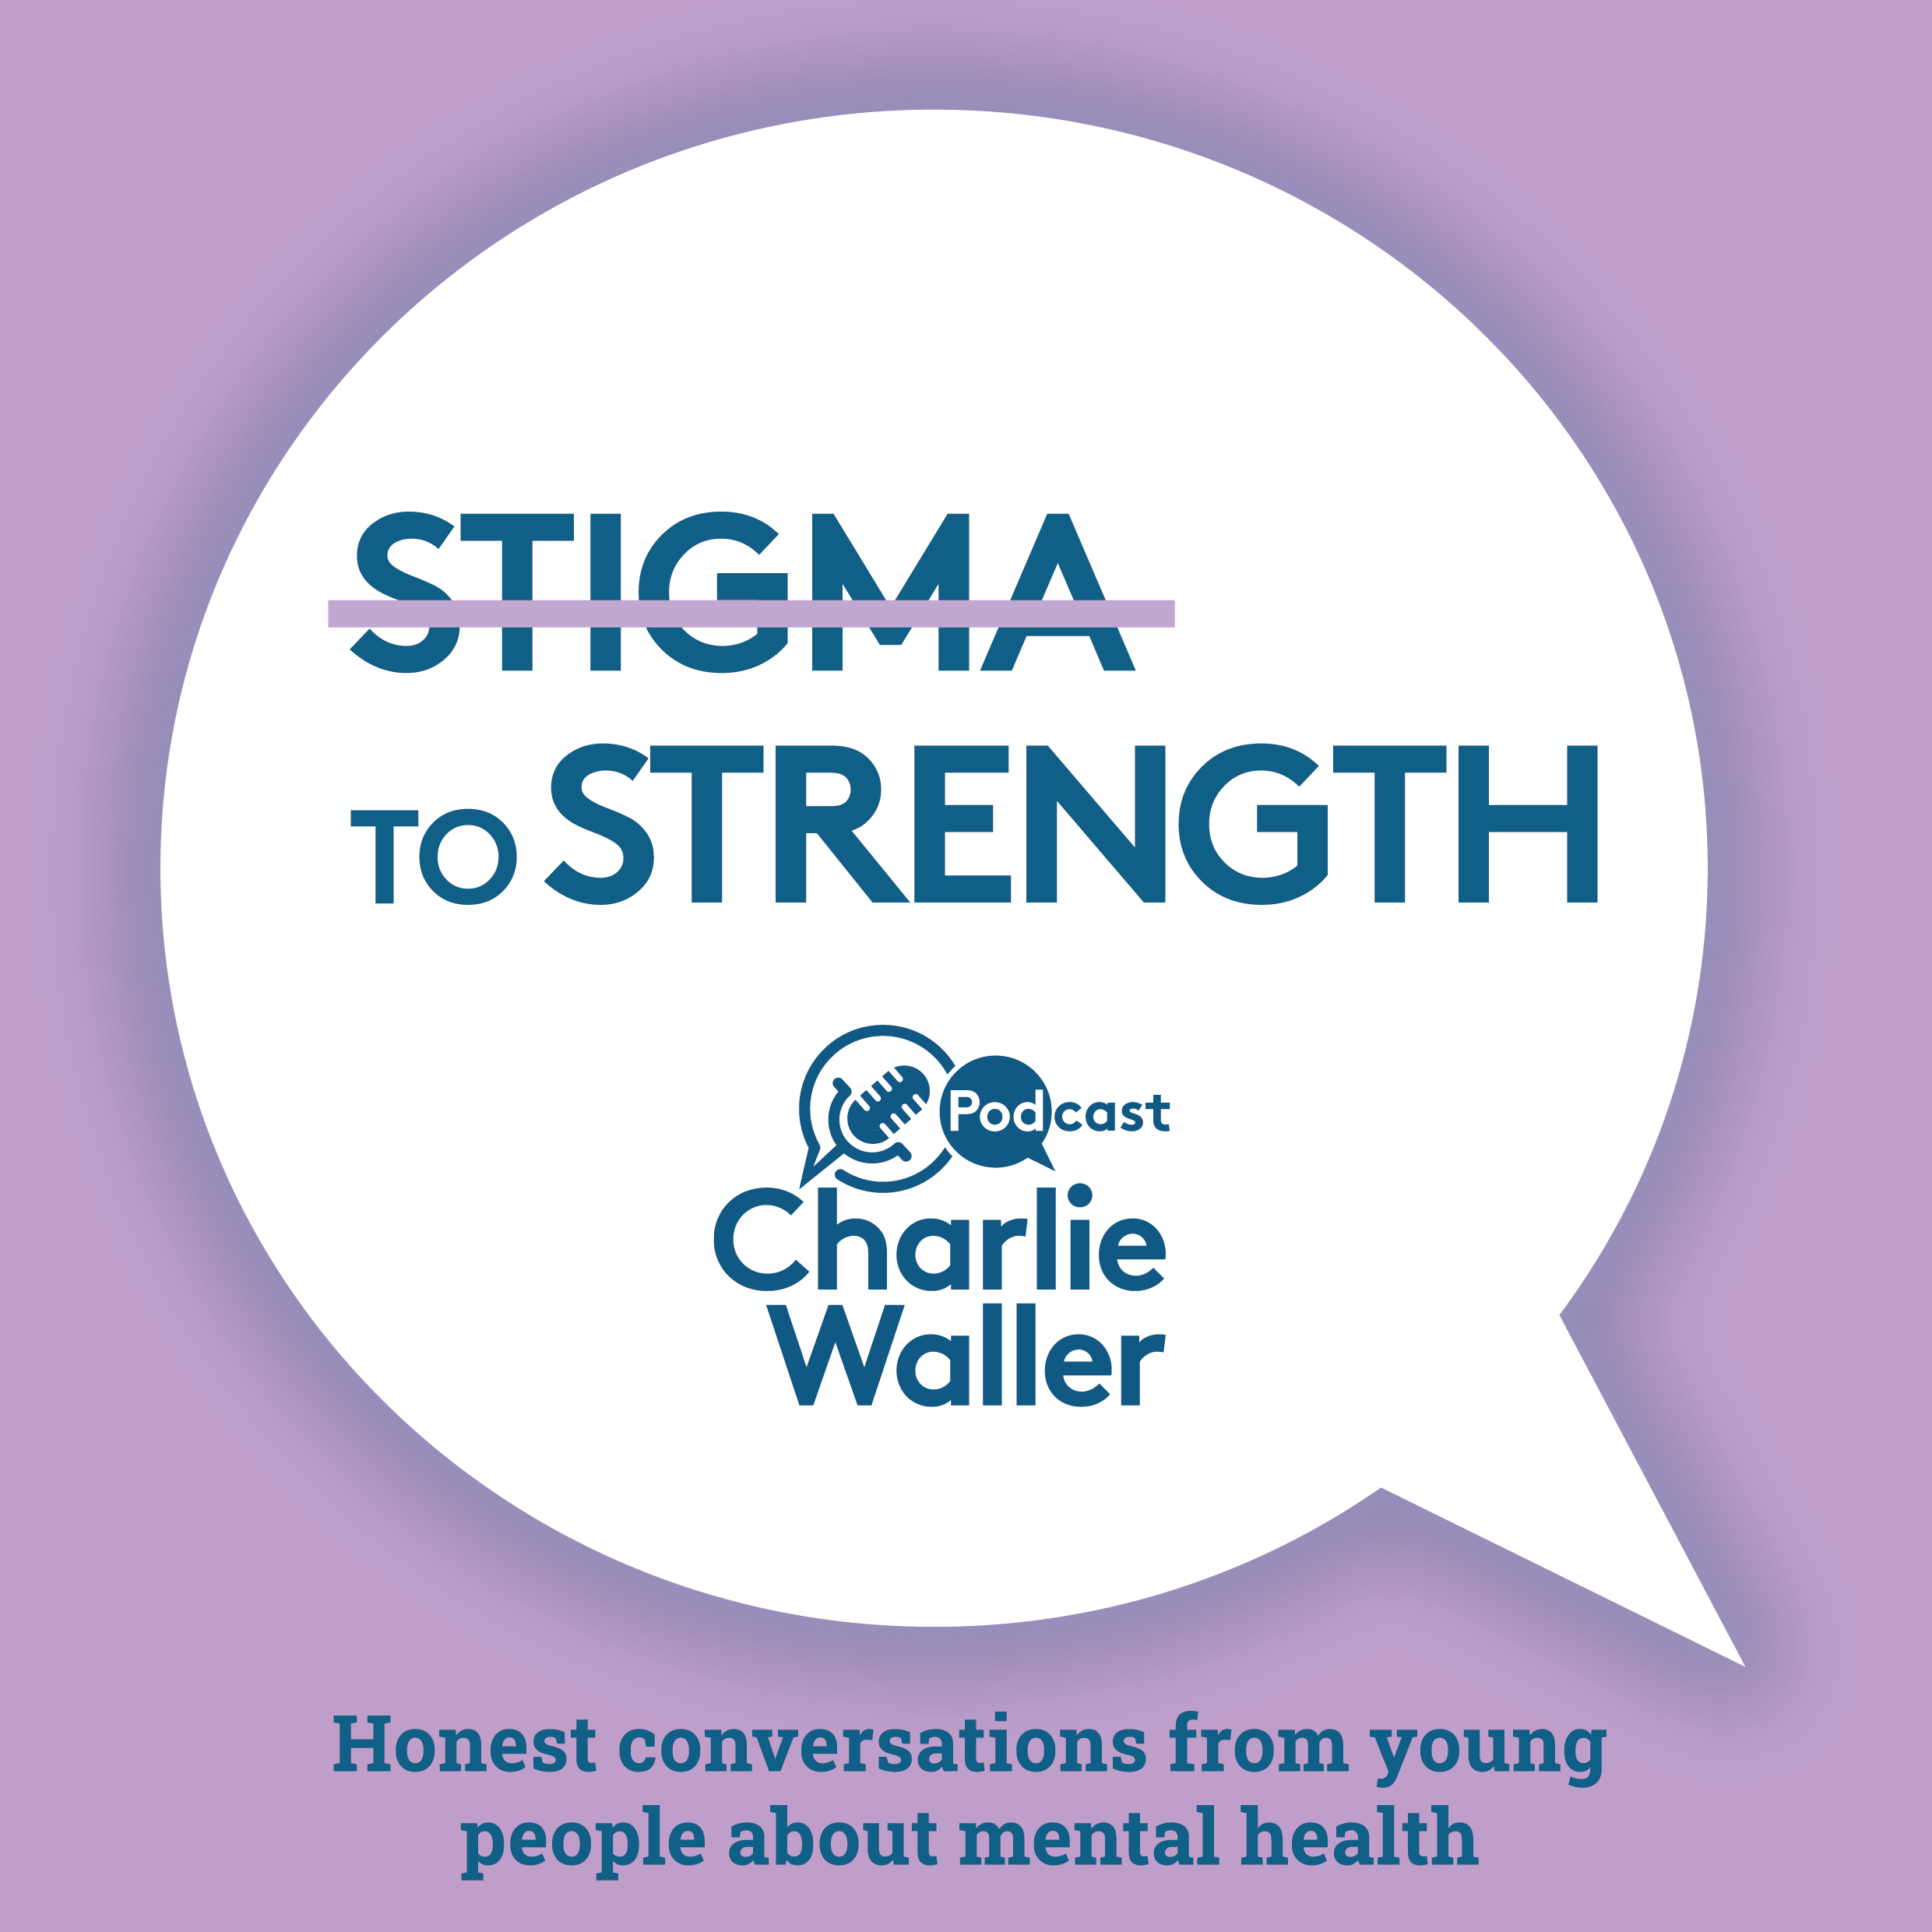 Stigma to Strength podcast logo: the word 'stigma' is visibly crossed out